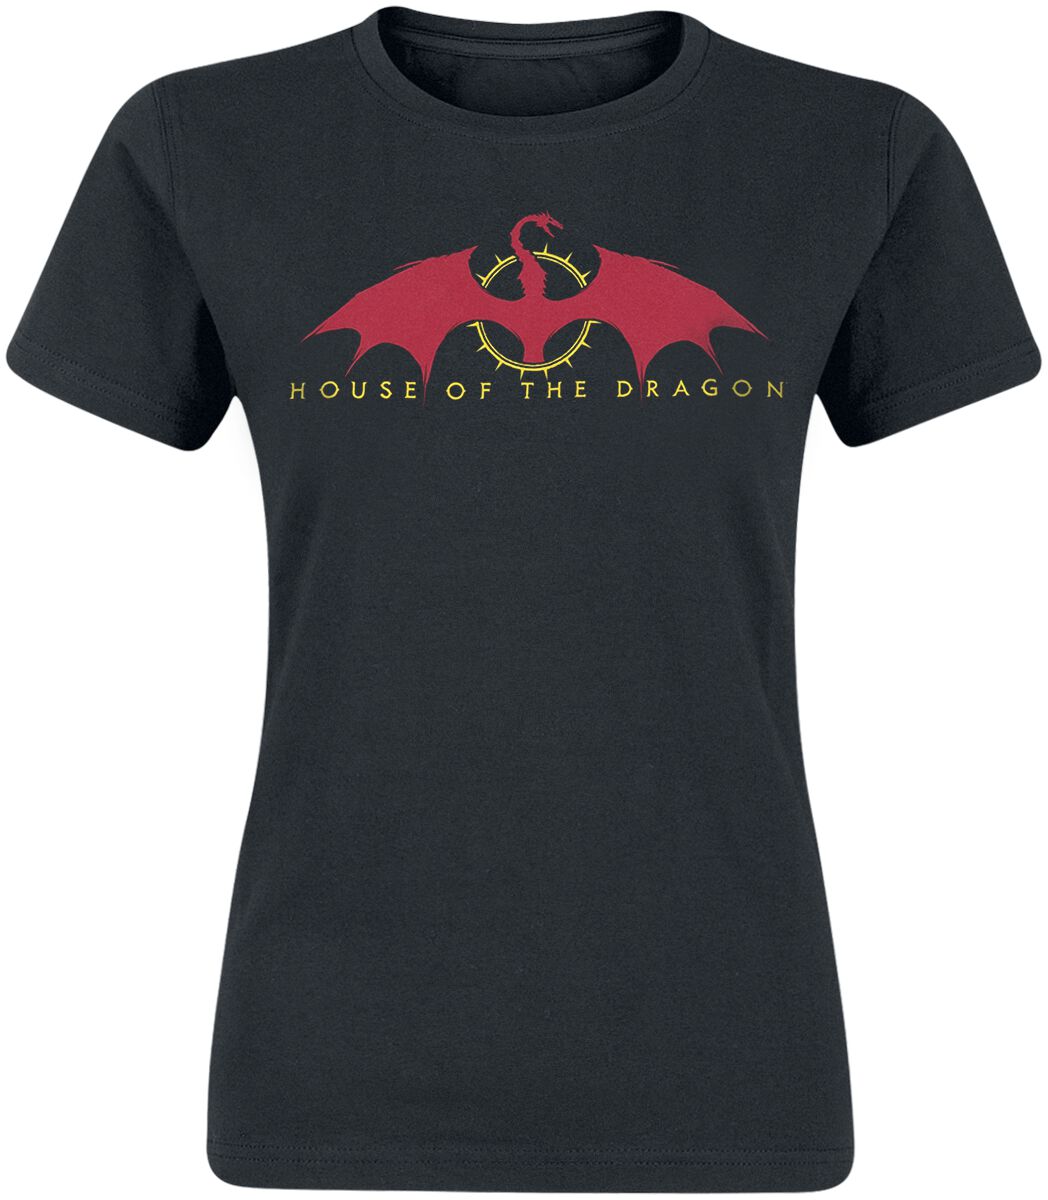 T-Shirt Manches courtes de Game Of Thrones - House of The Dragon - Red Wings - S à XXL - pour Femme 